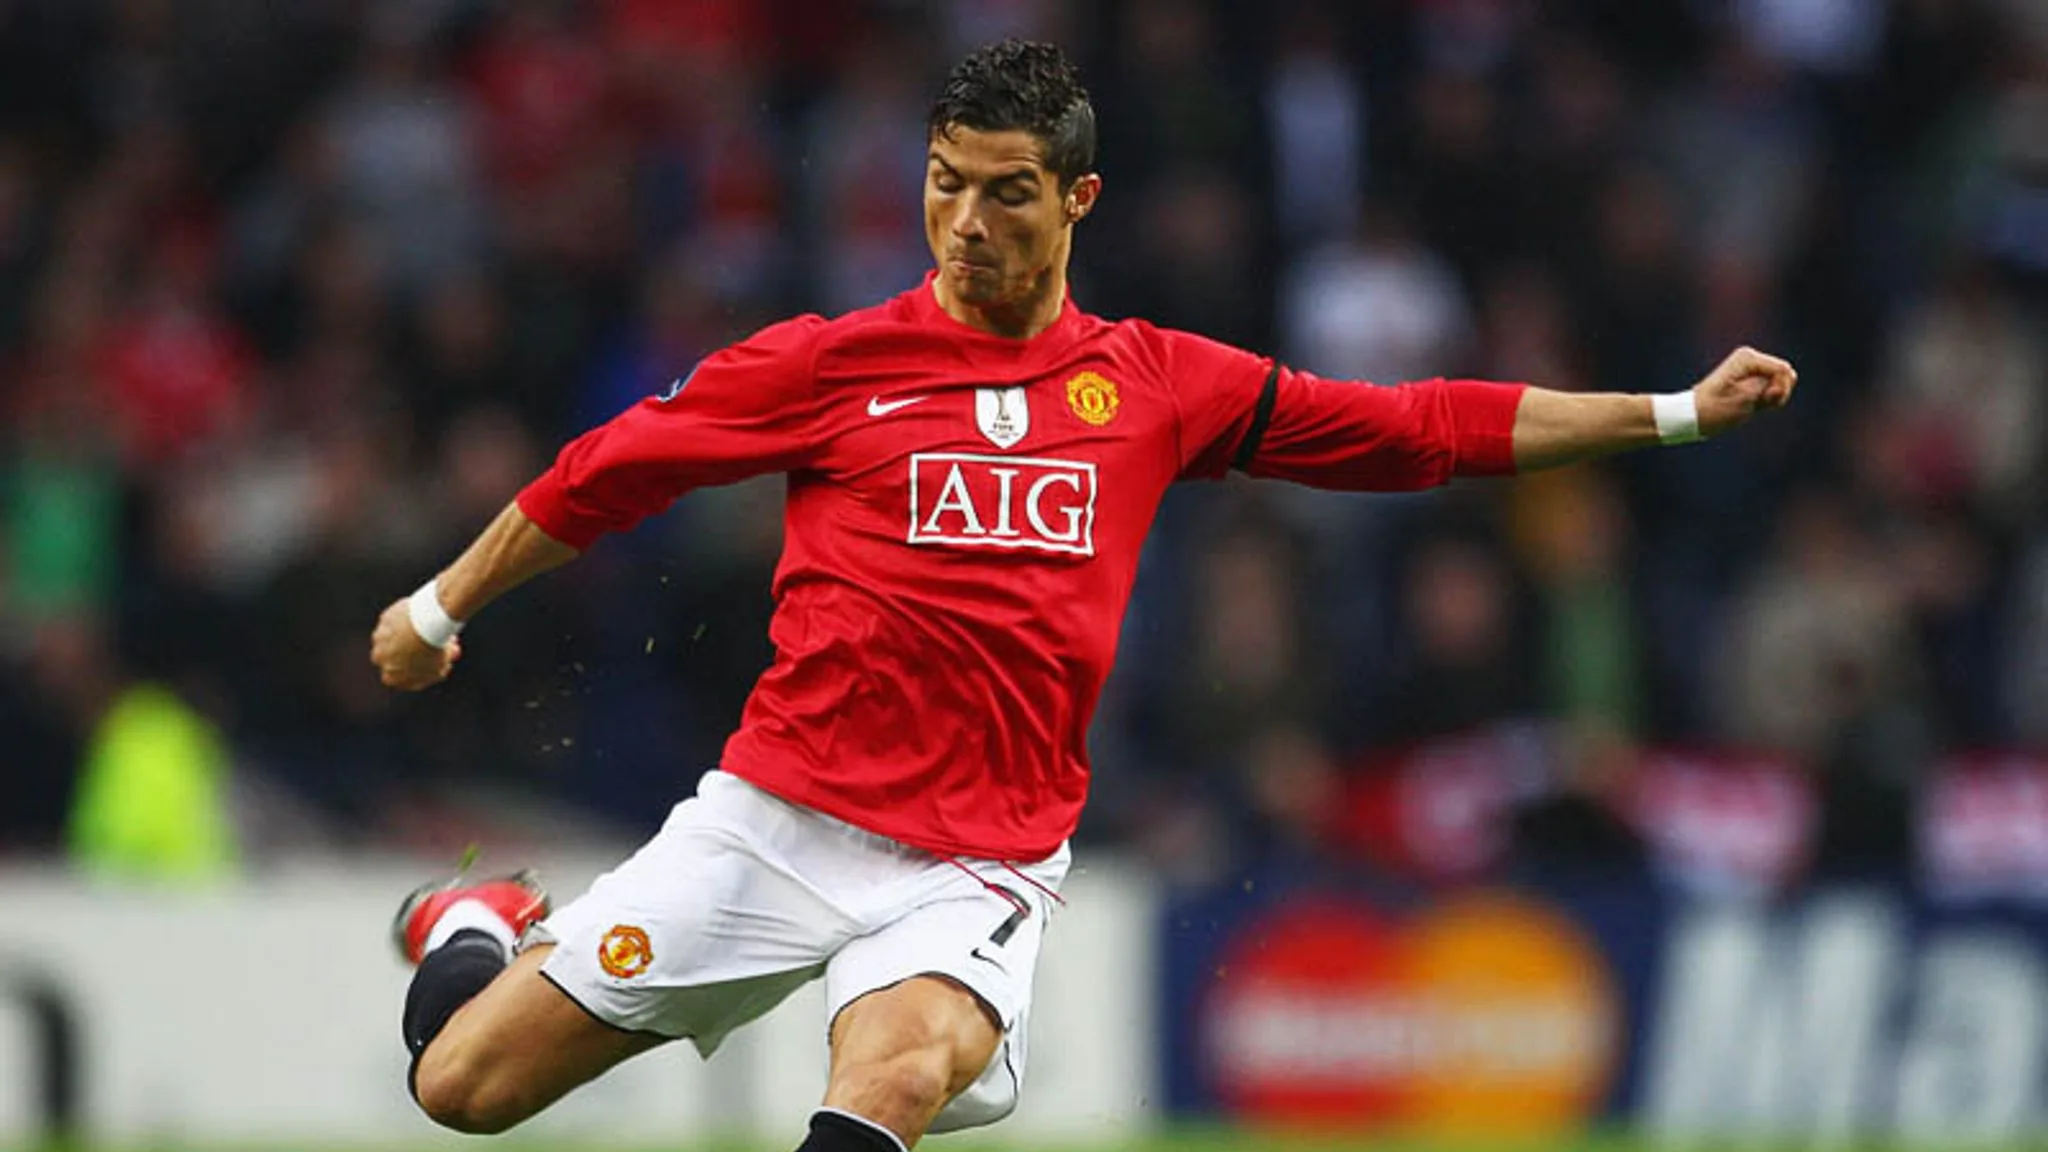 A Beautiful History of Cristiano Ronaldo: From Birth to Top Professional Footballer